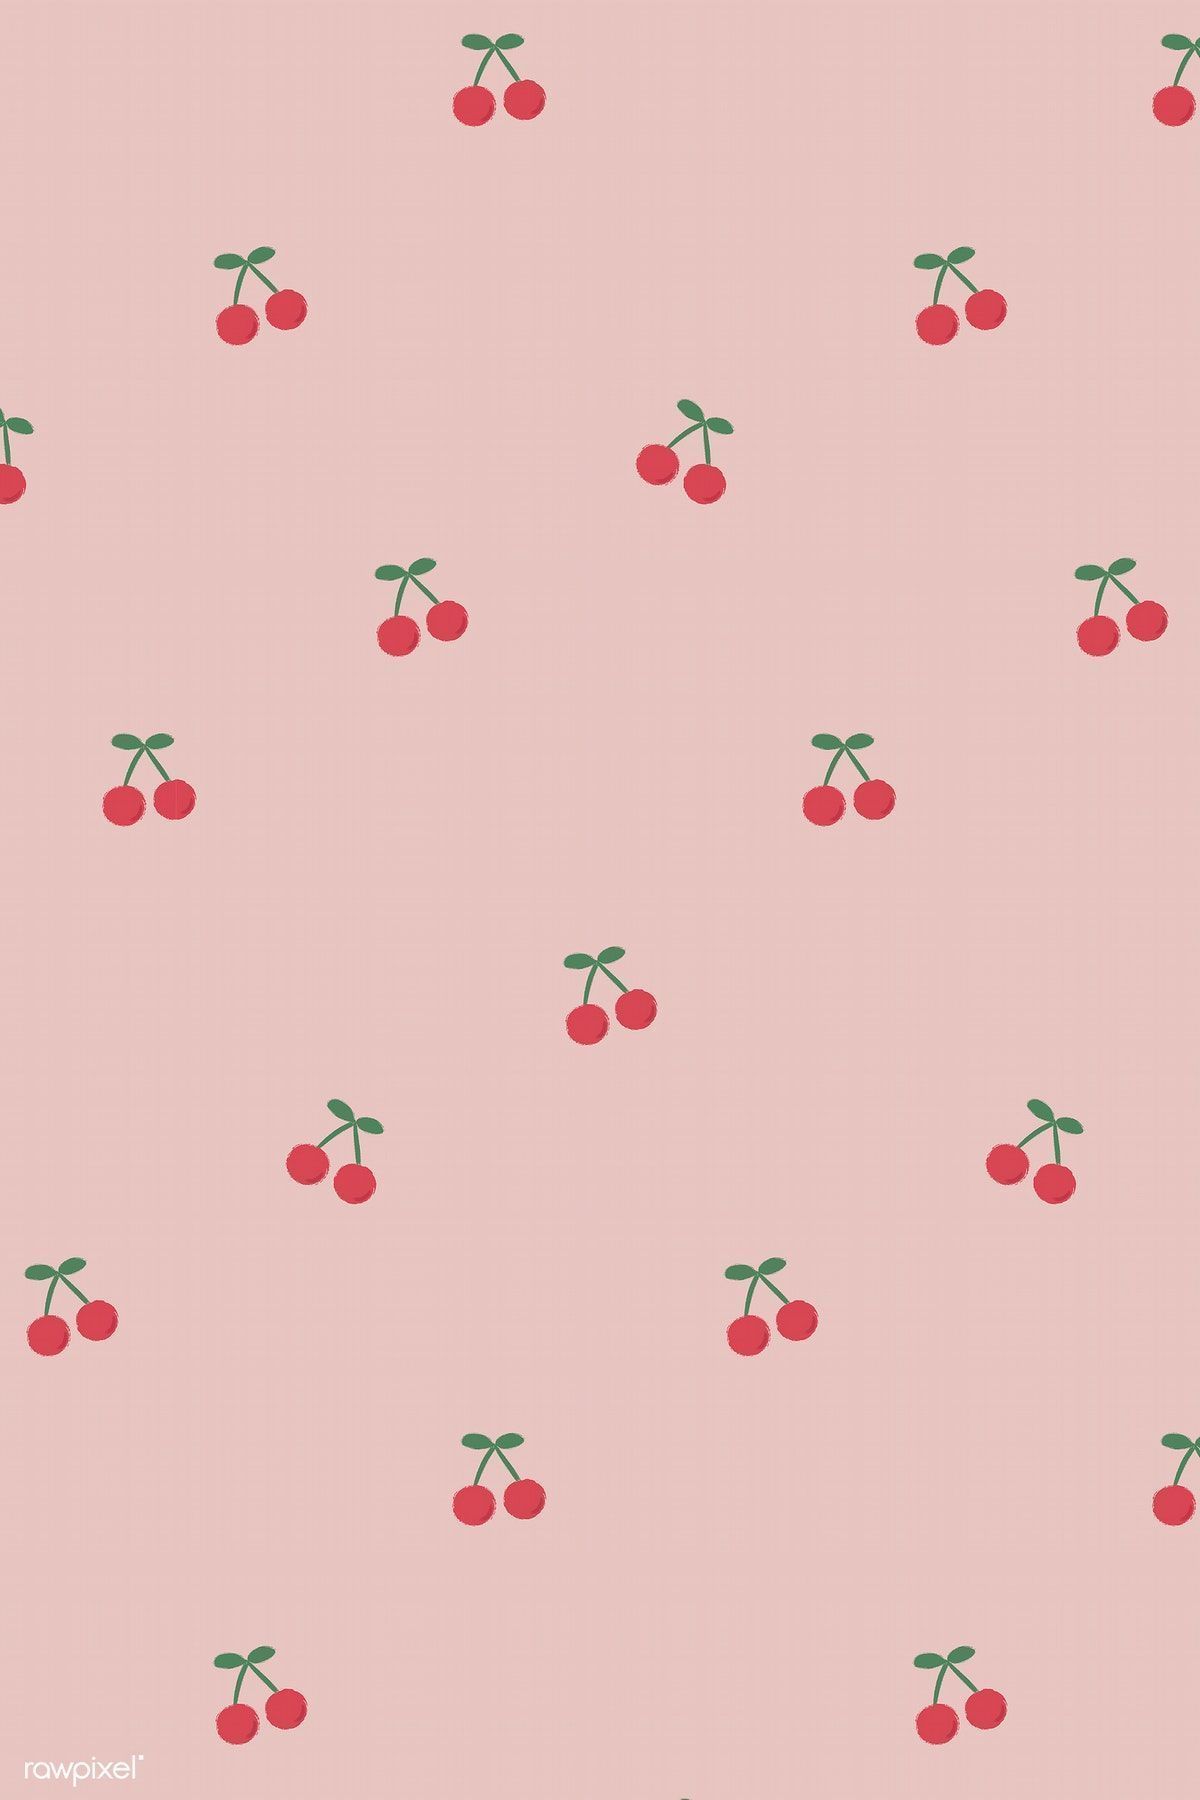 Download premium vector of Red hand drawn cherry seamless pattern on pink. Cute patterns wallpaper, Aesthetic iphone wallpaper, iPhone background wallpaper